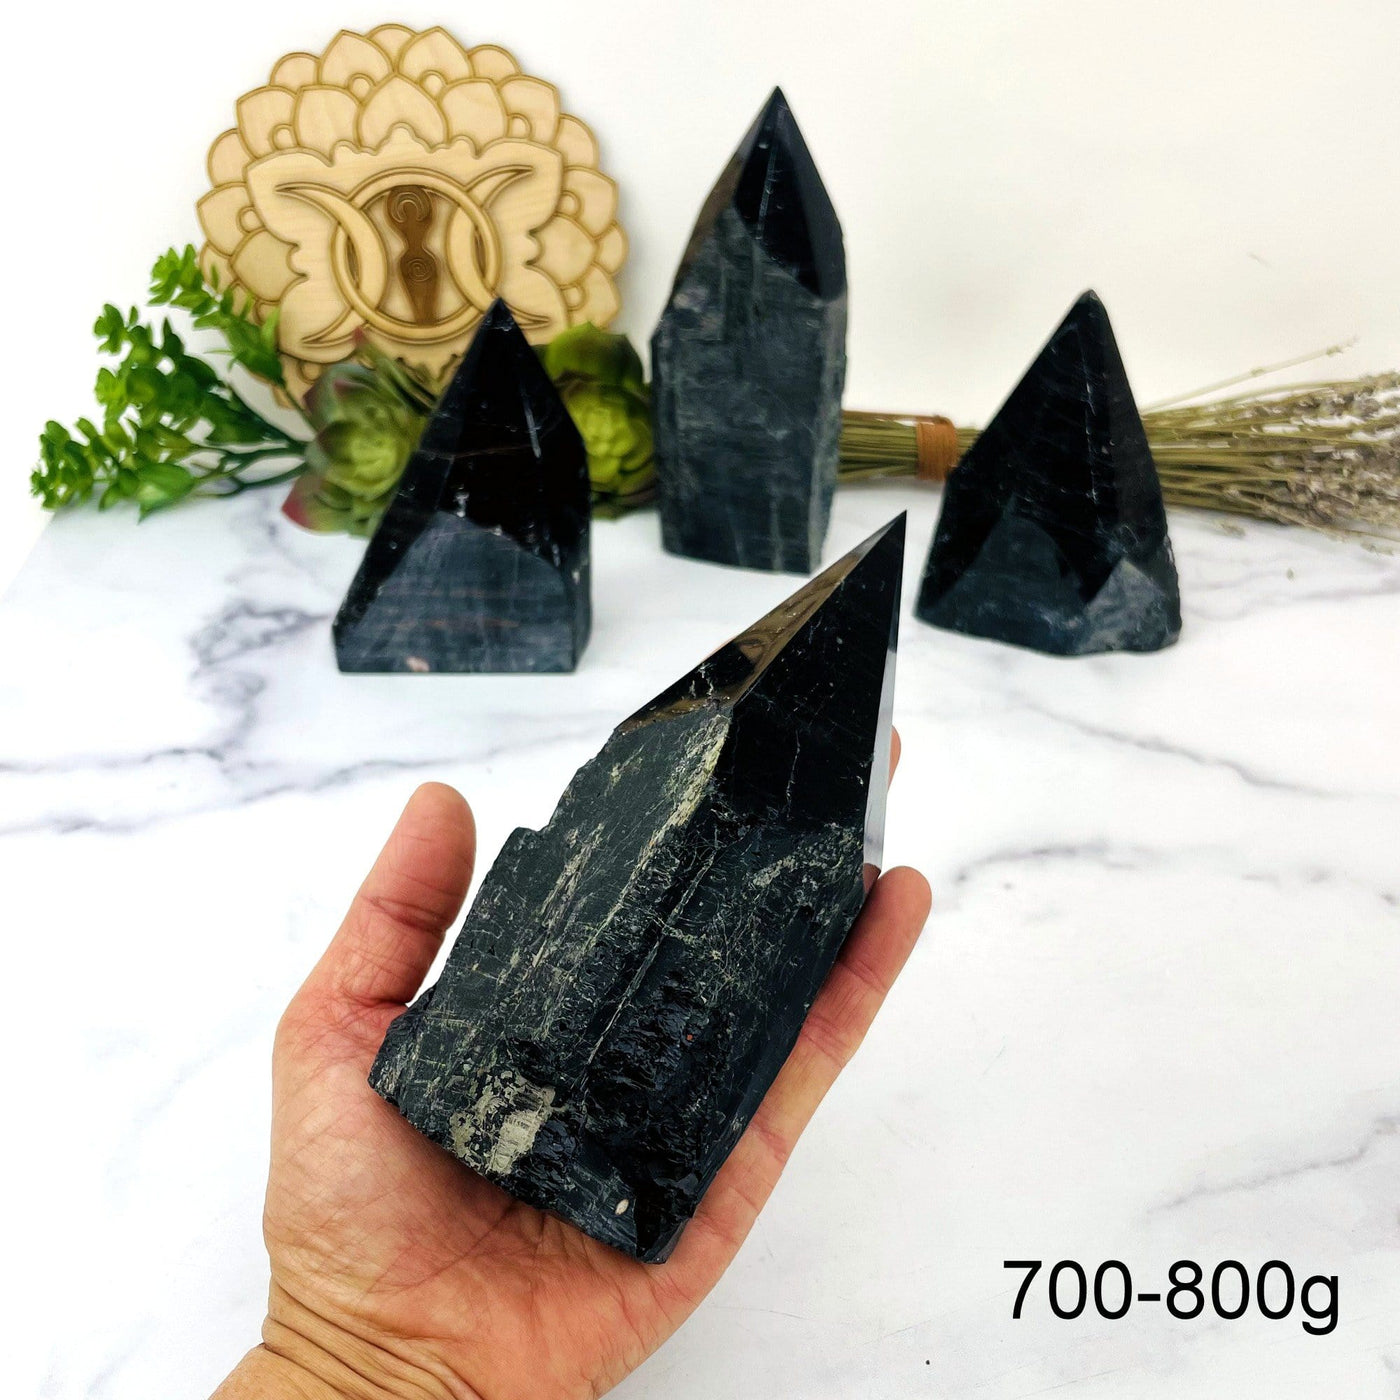 Black Tourmaline with Red Hematite Veins Semi Polished Points weight in 700-800g in hand for size reference